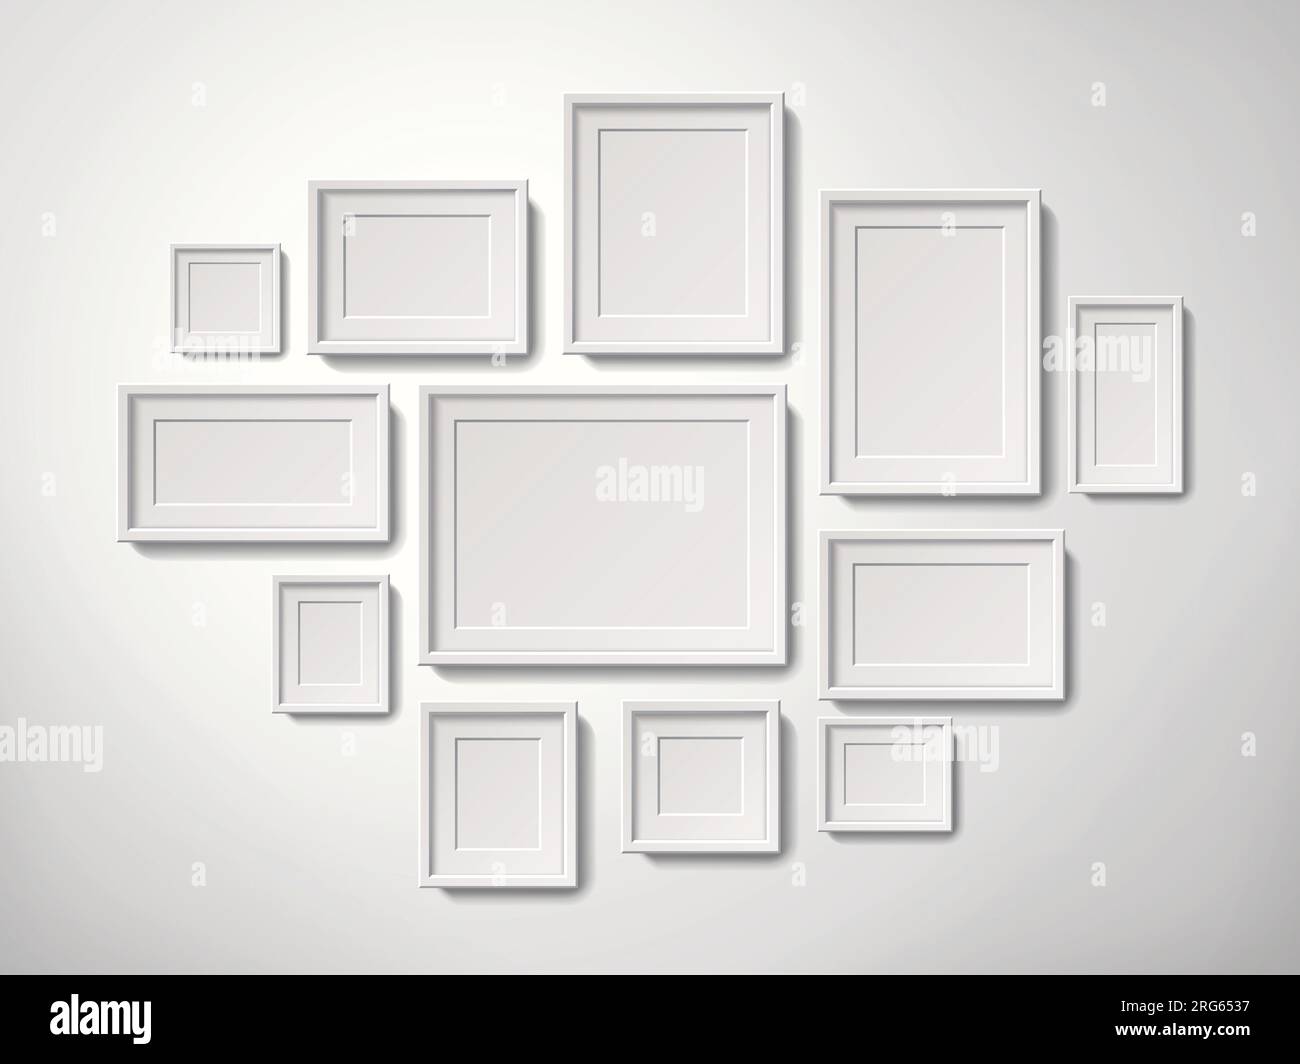 https://c8.alamy.com/comp/2RG6537/blank-white-picture-frames-collection-hanging-on-the-wall-3d-illustration-realistic-style-2RG6537.jpg